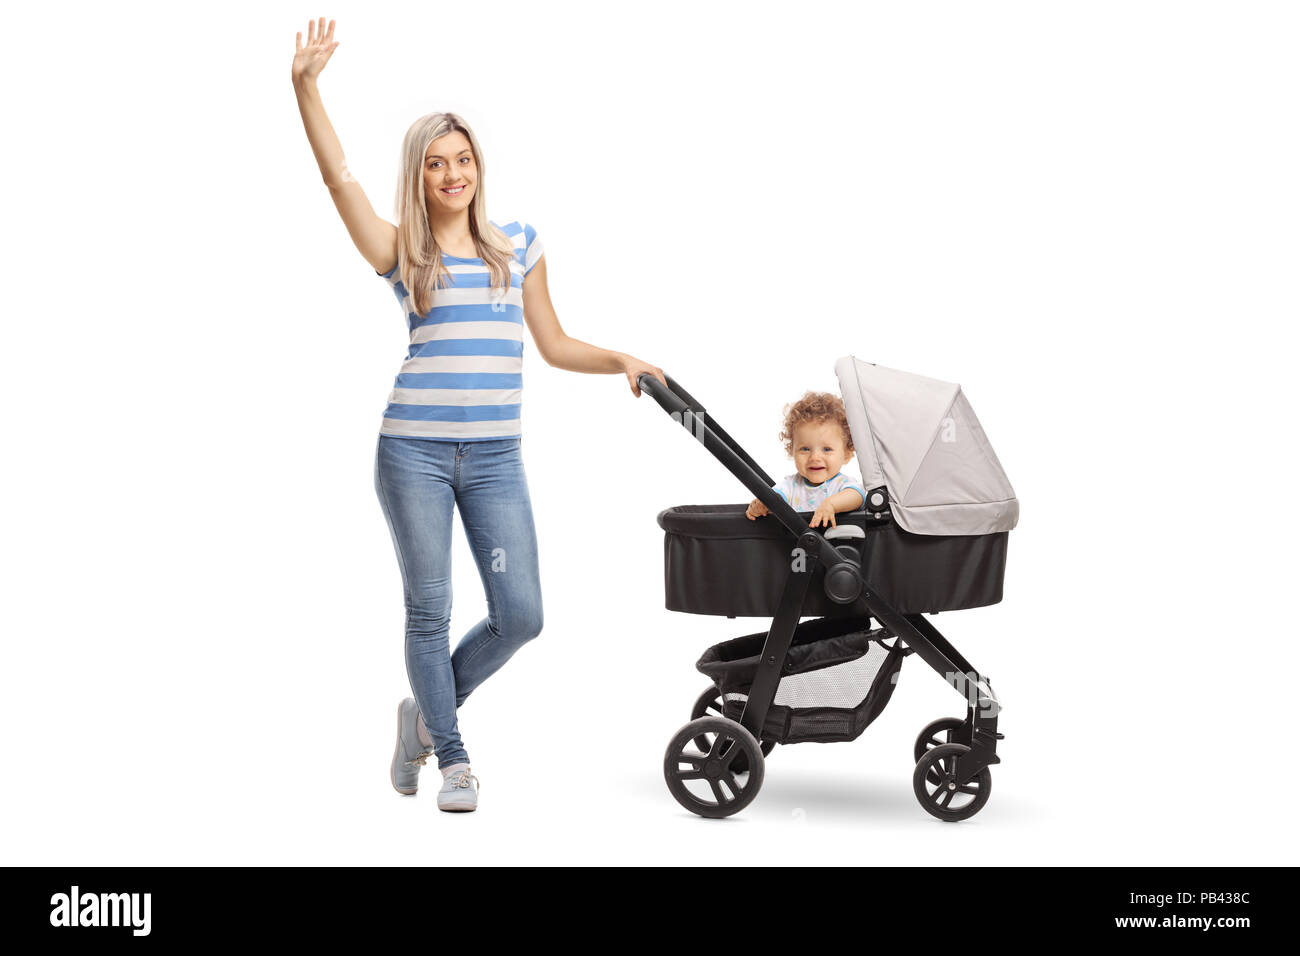 Full length portrait of a young mother with a baby boy in a stroller waving at the camera isolated on white background Stock Photo